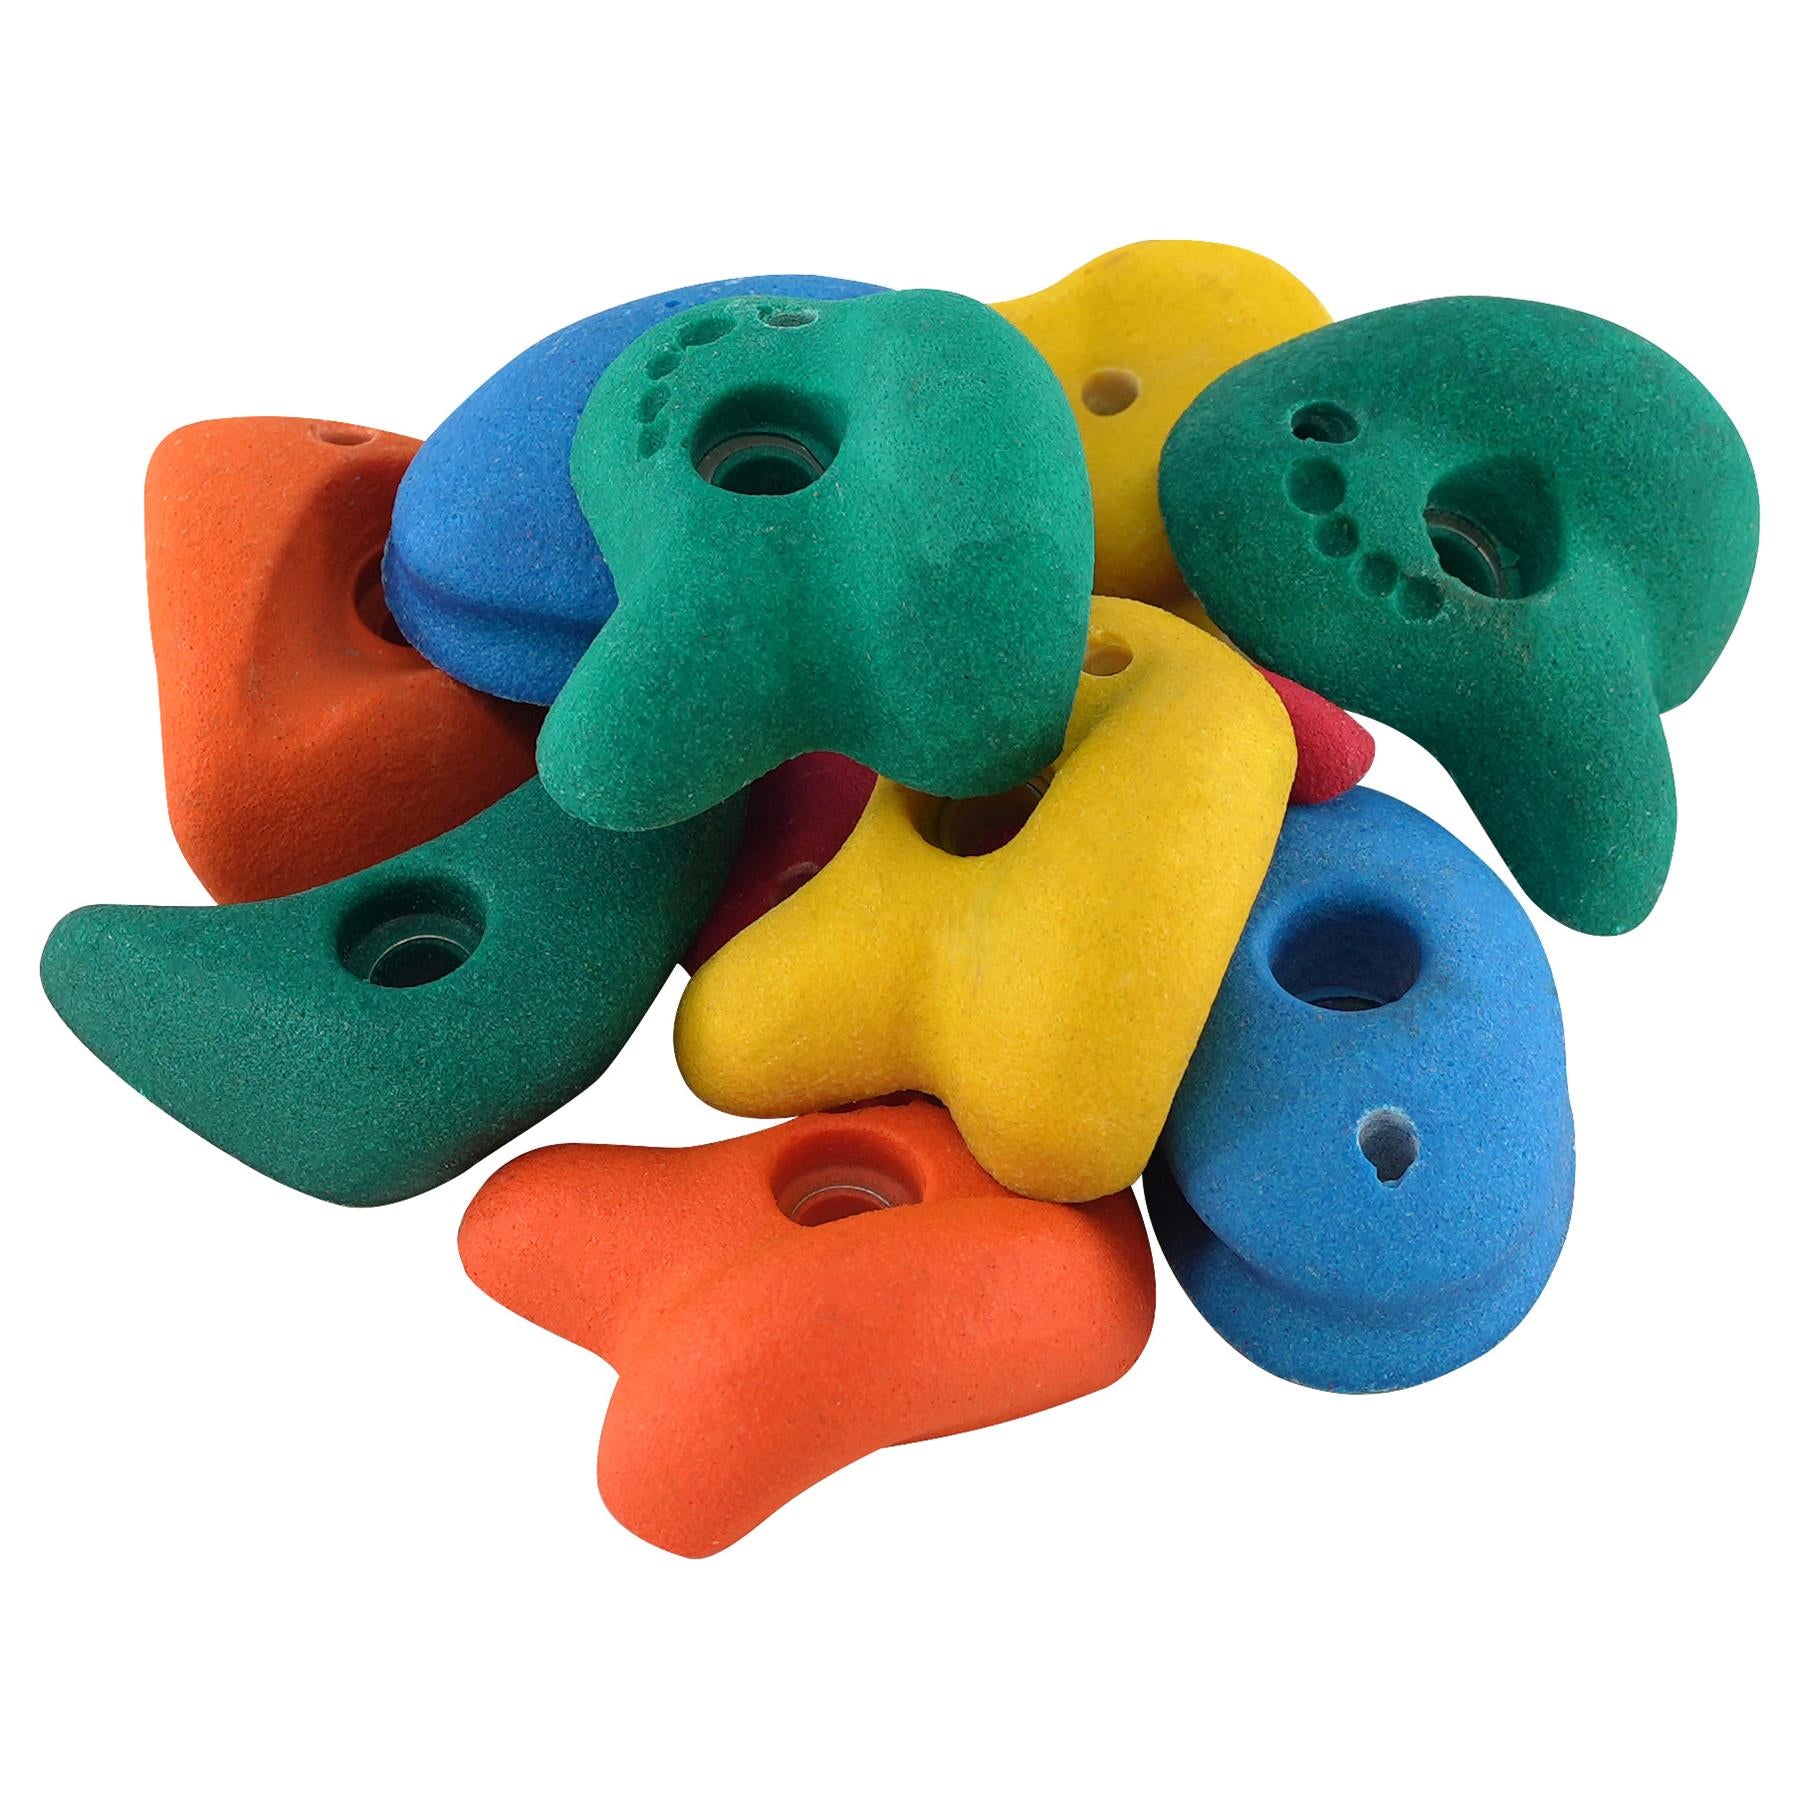 Climbing Stones for Climbing Wall by The Magic Toy Shop - UKBuyZone